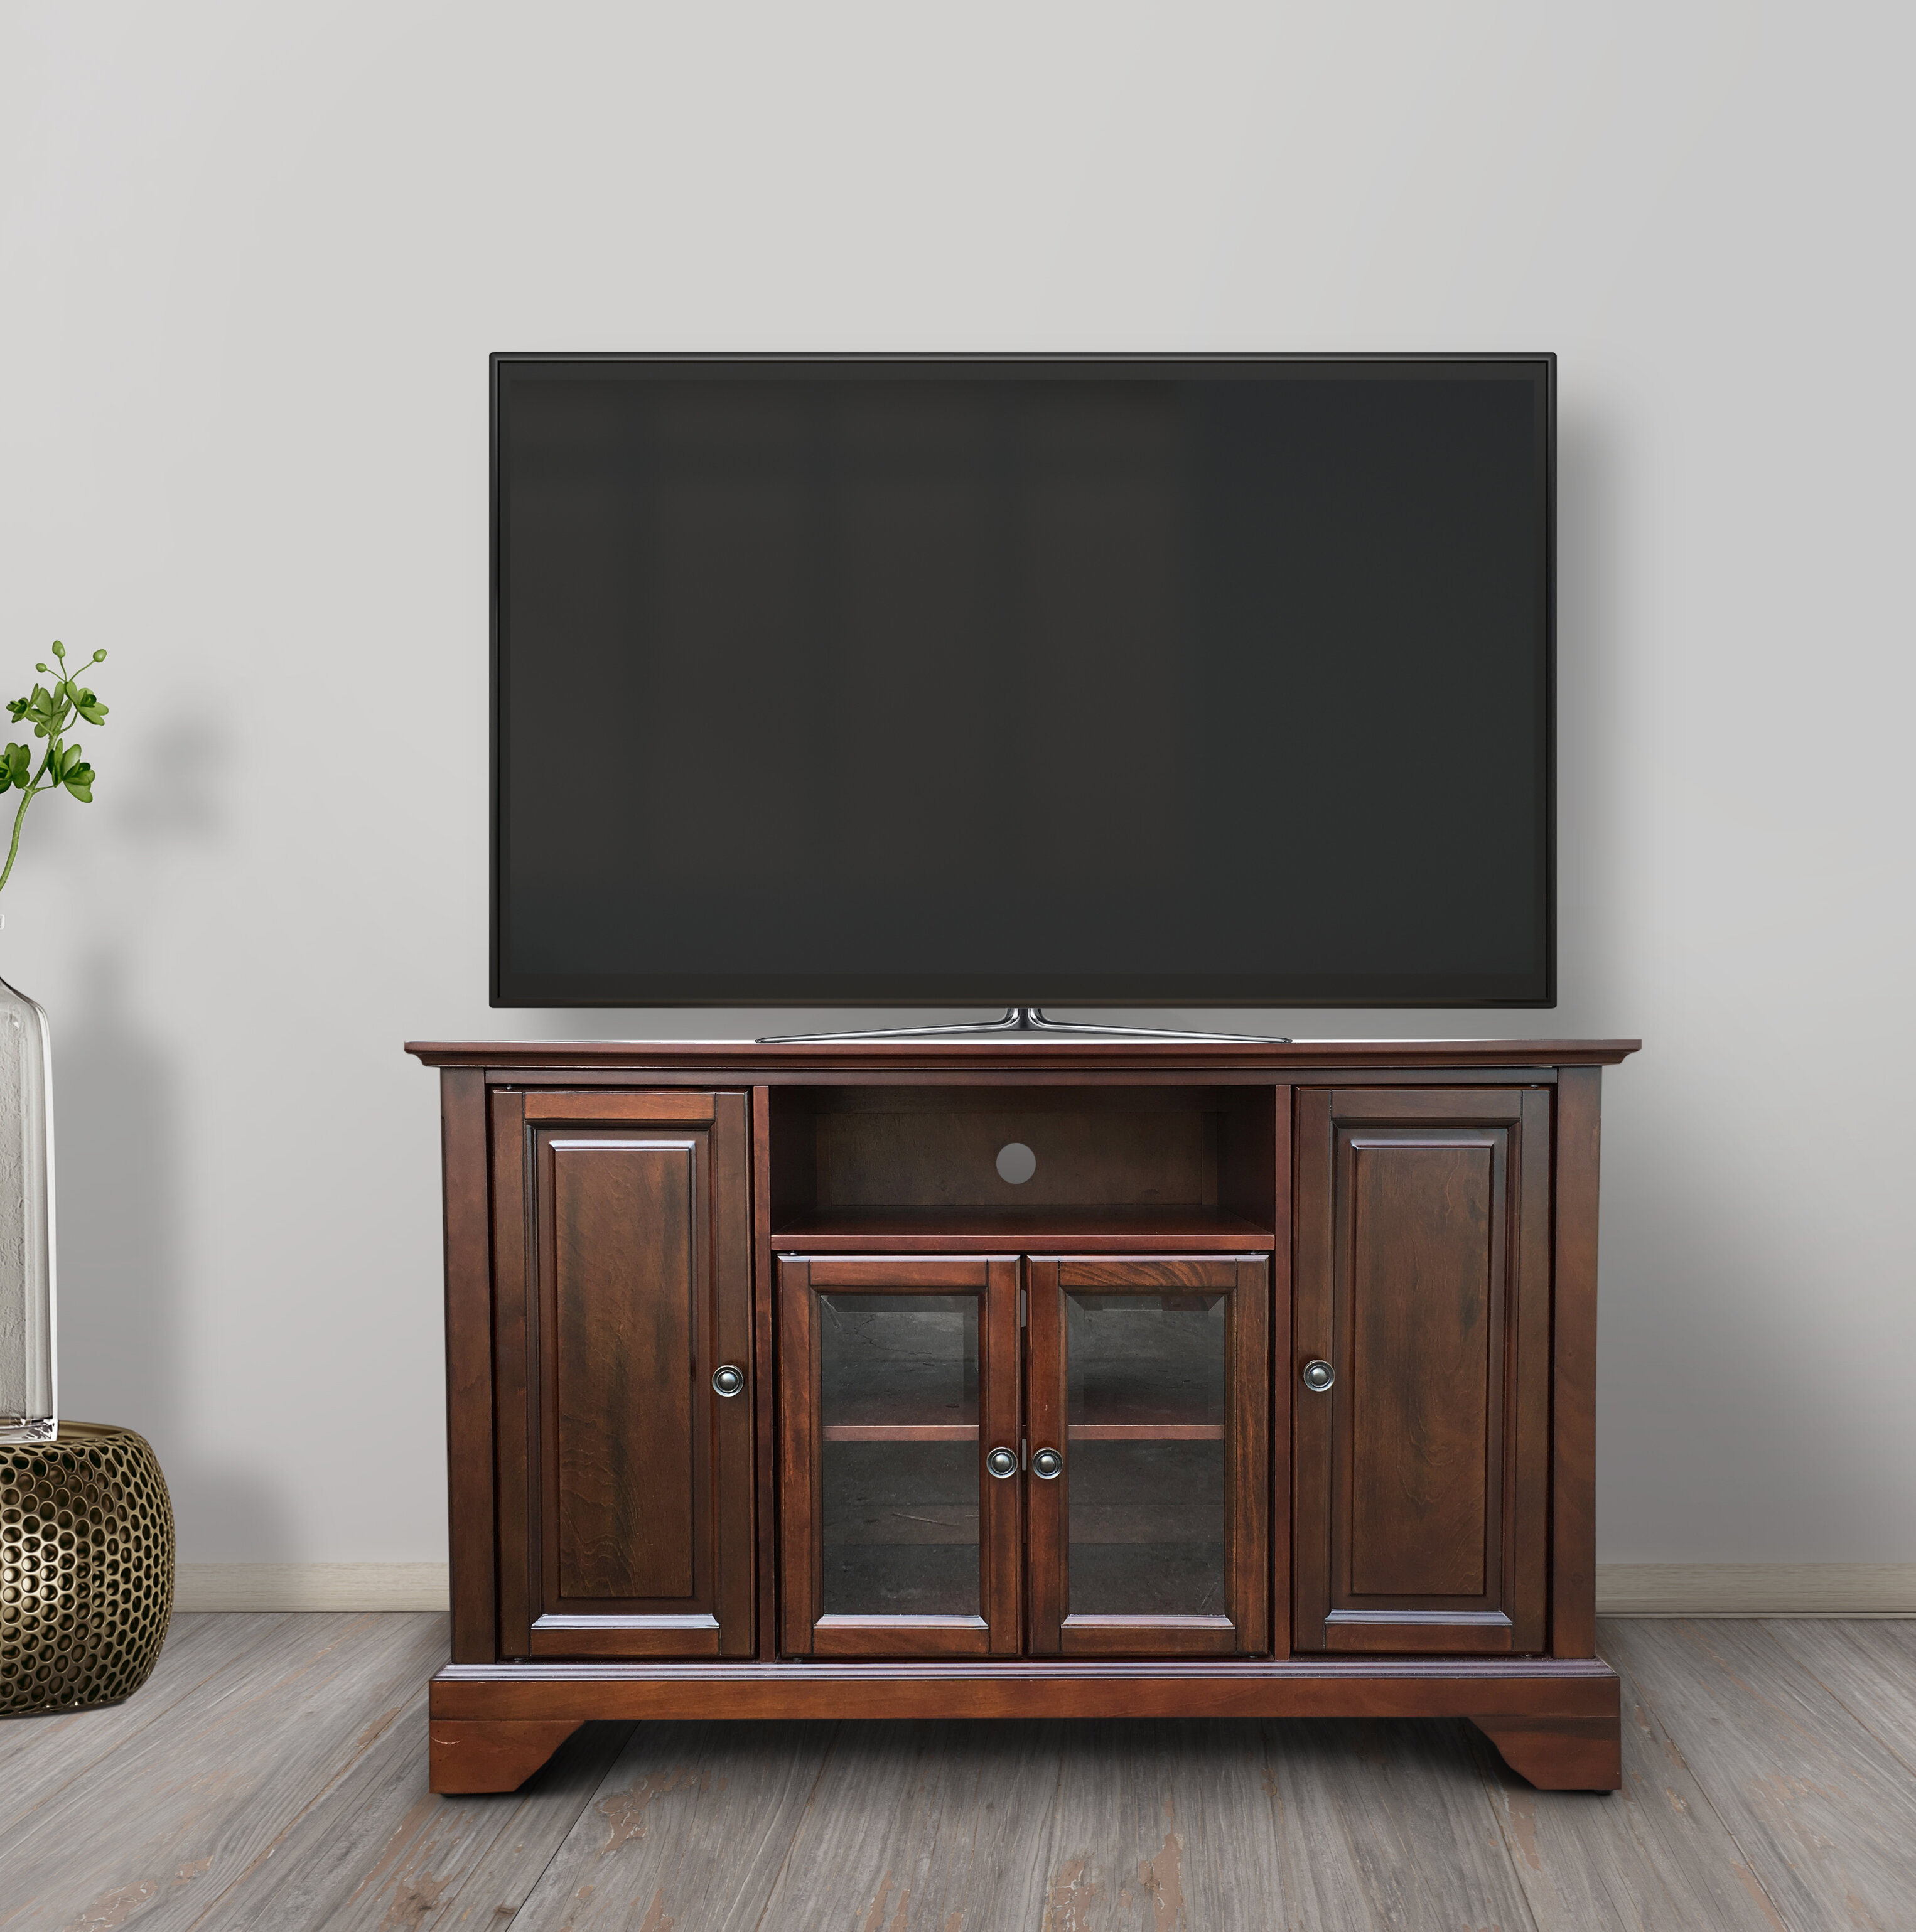 Red Barrel Studio Kimiko Tv Stand For Tvs Up To 55 Inches